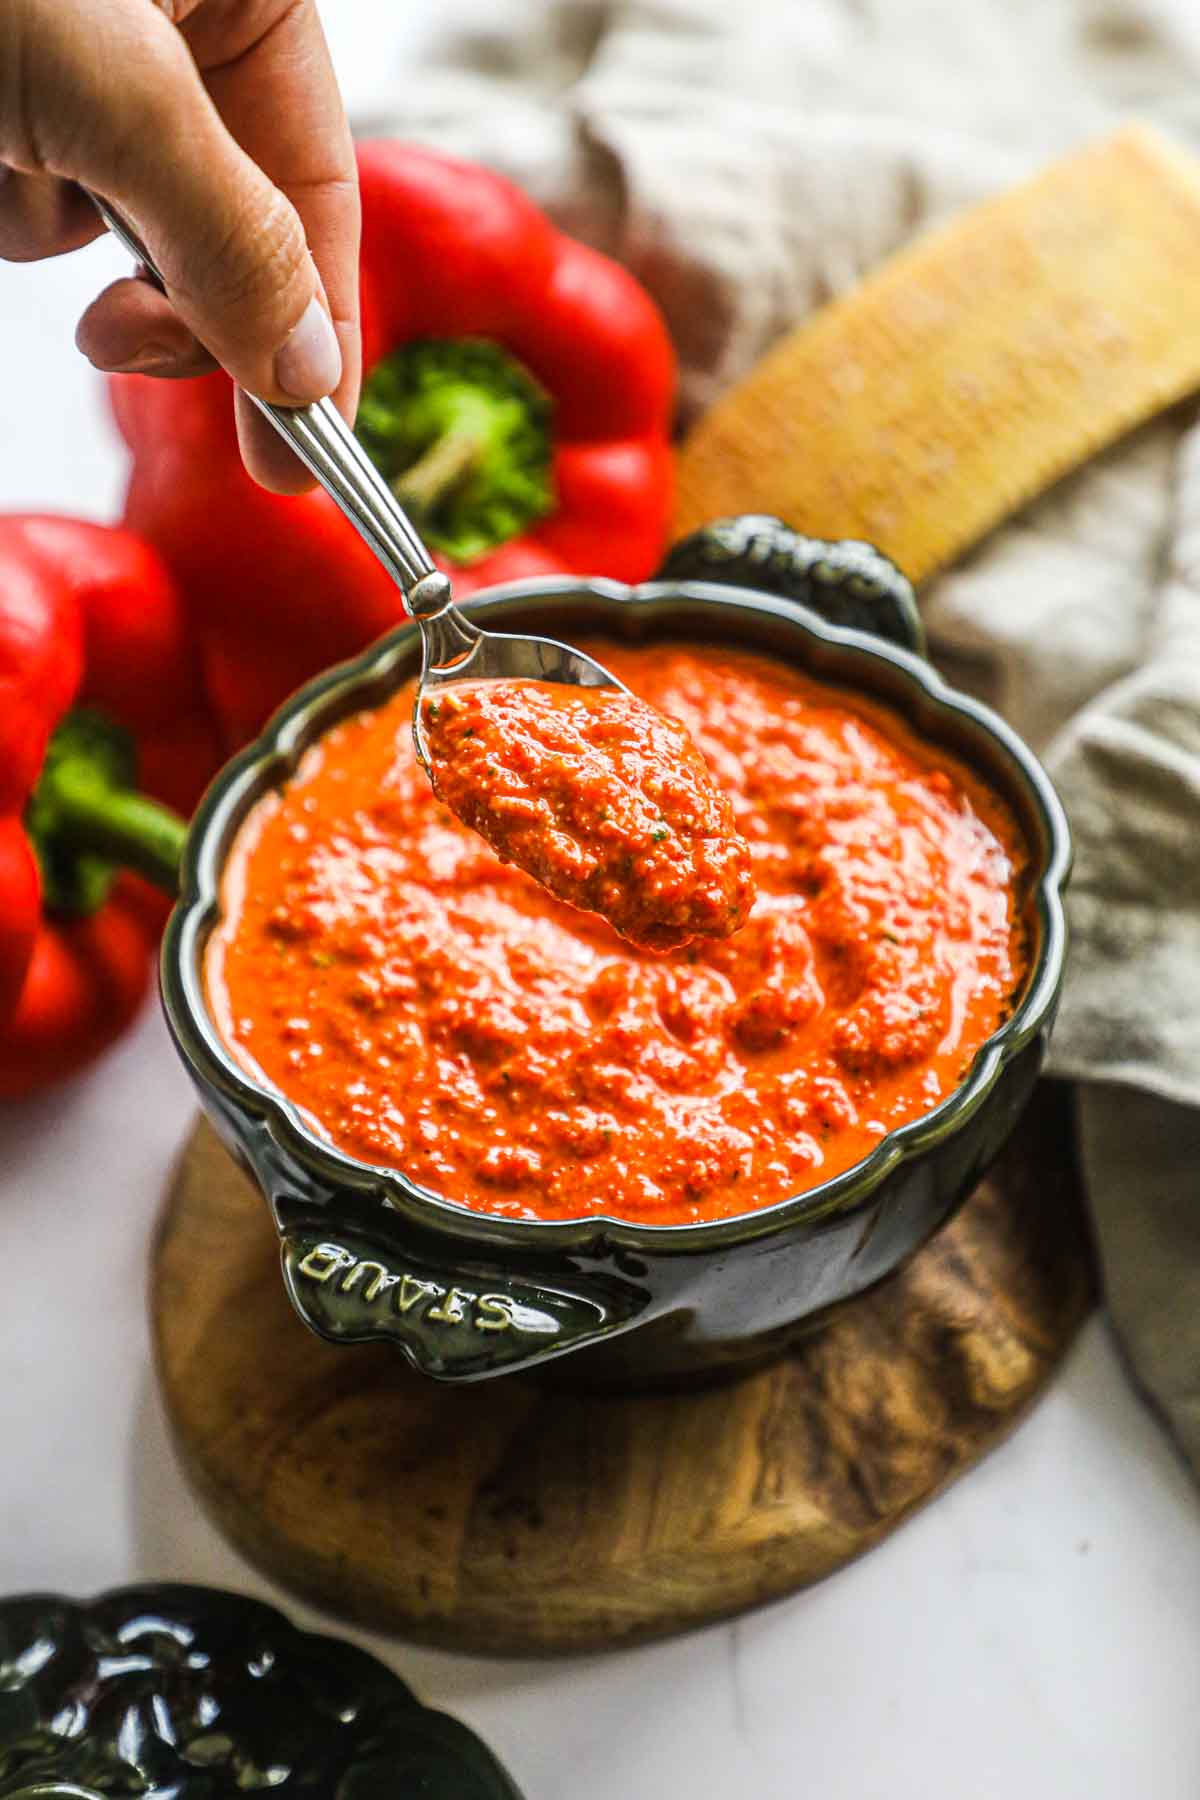 Roasted red pepper pesto with pecorino romano, parmigiano-reggiano, basil, and garlic blended and served in a cocotte for pasta, crostini, sandwiches, and more.